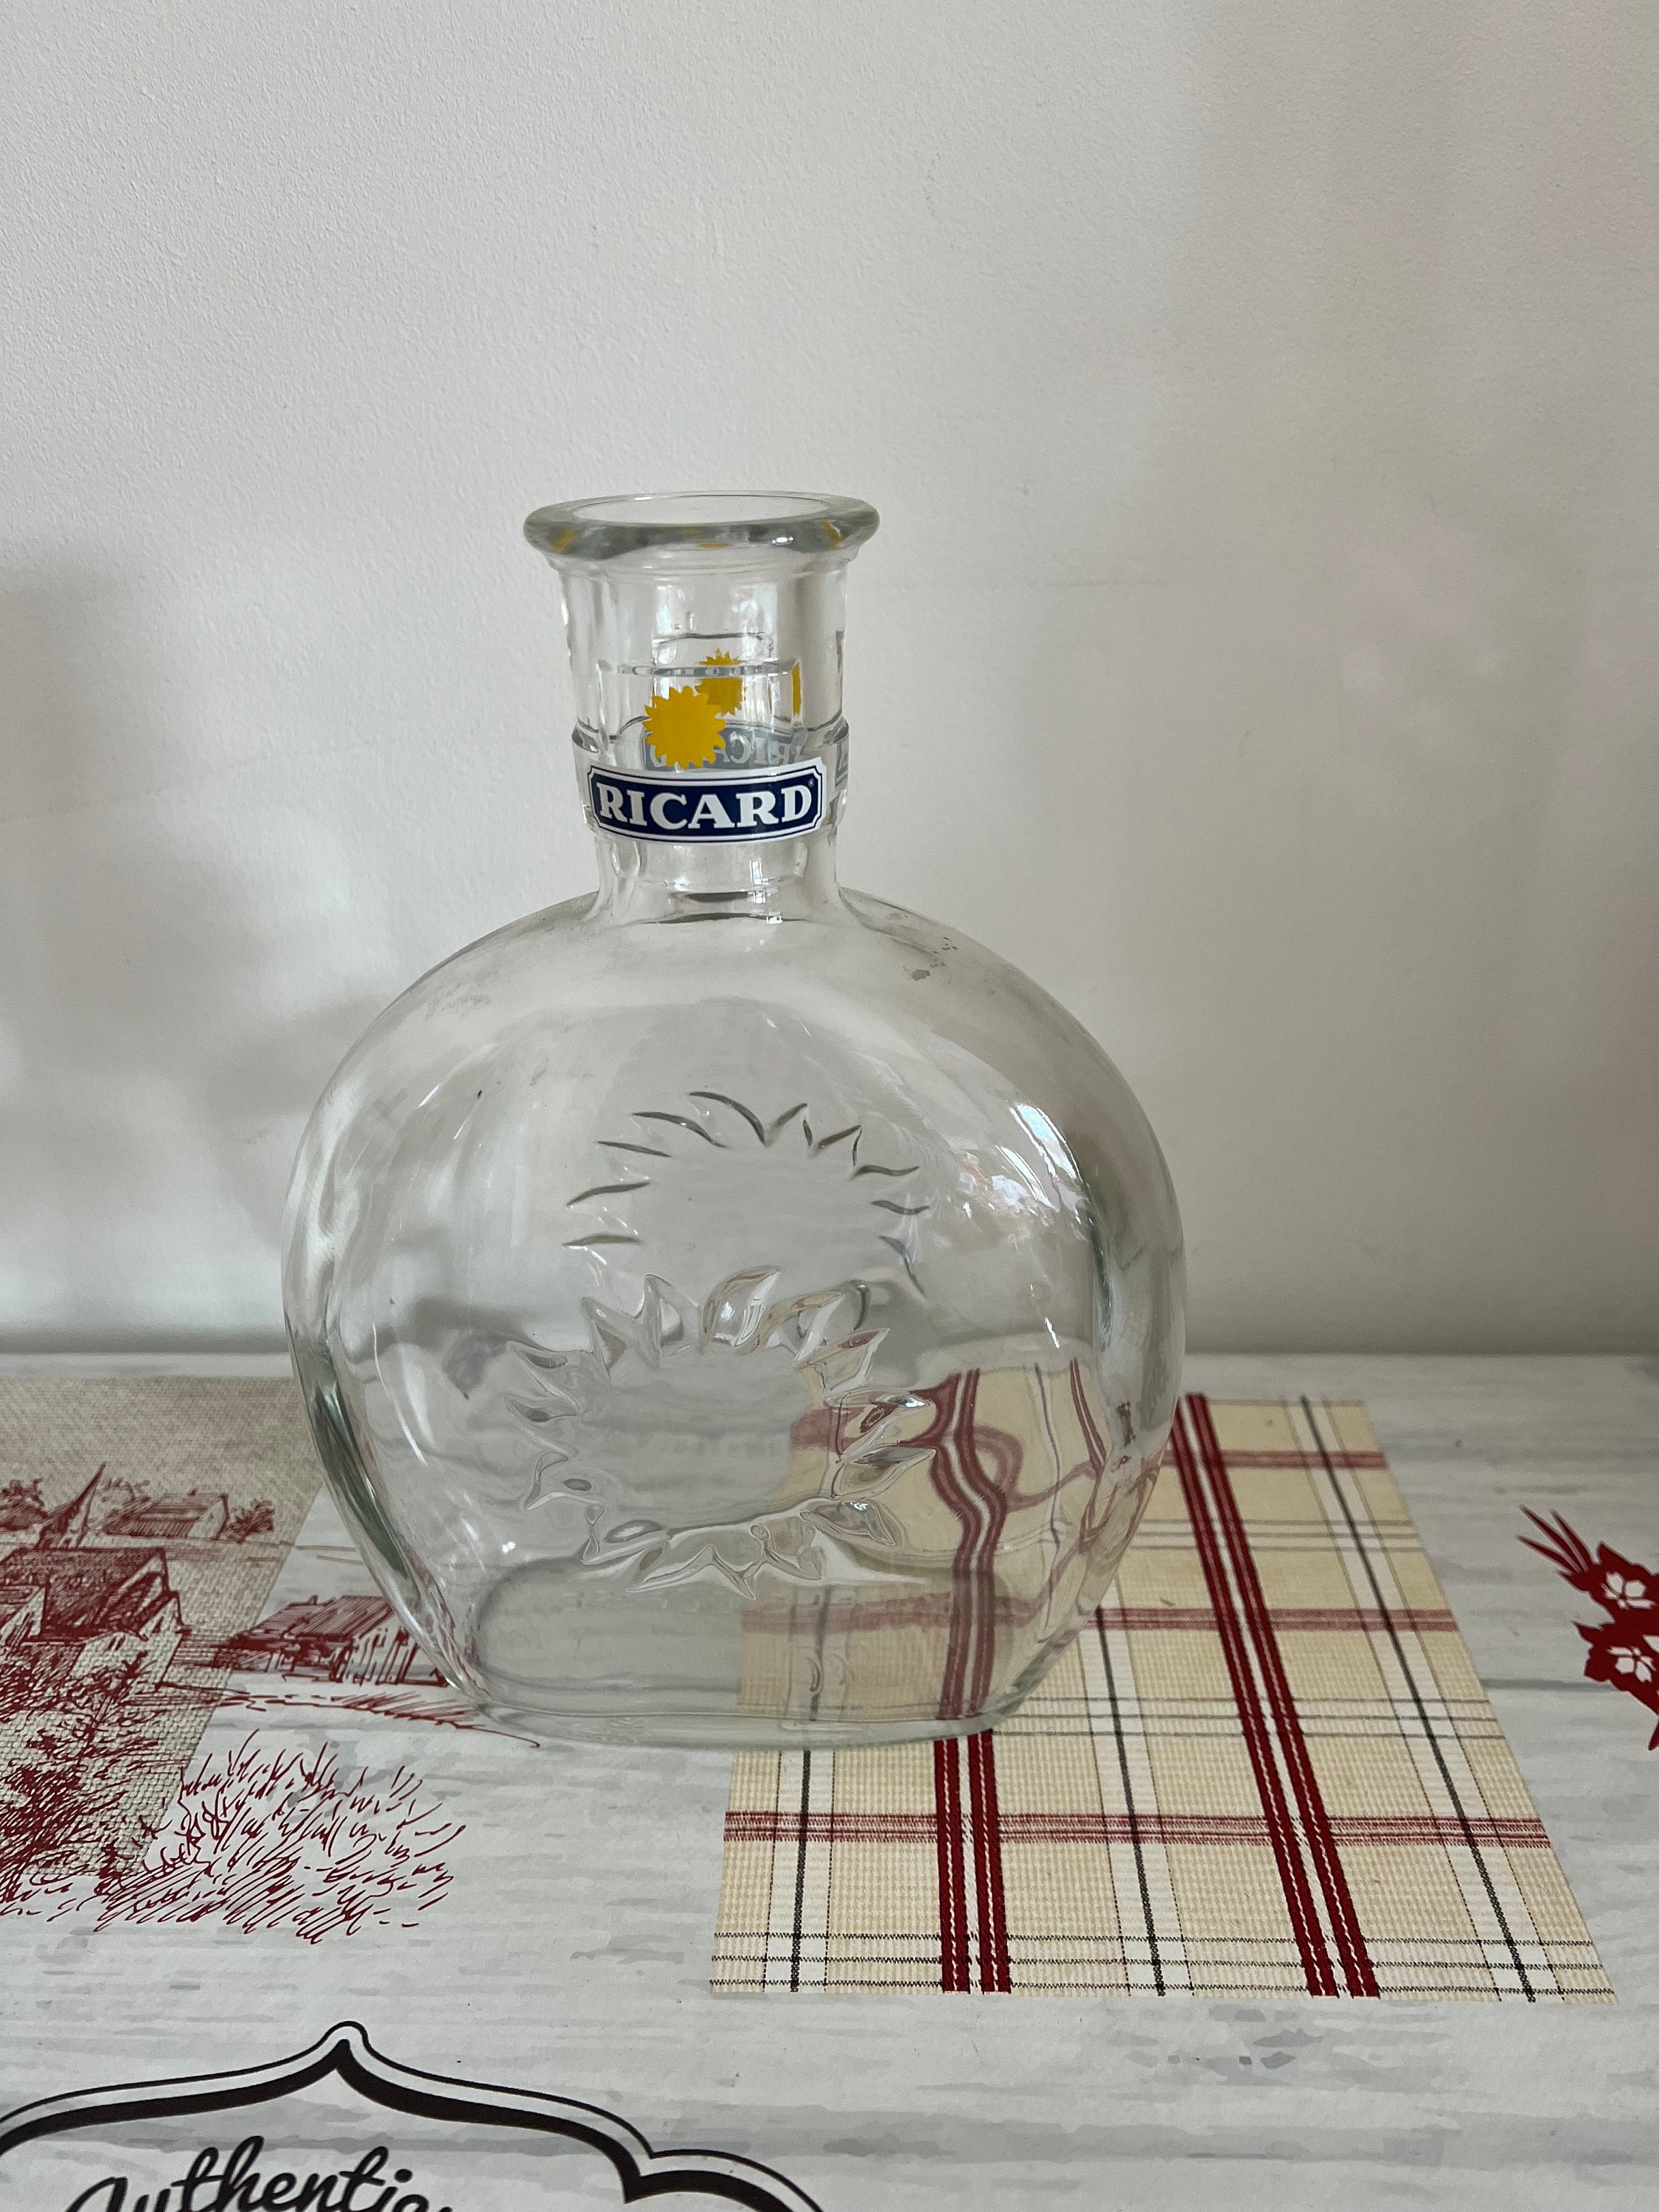 An Unusually Large 1 Litre Vintage French Ricard Water Carafe to Serve  Water With Pastis 